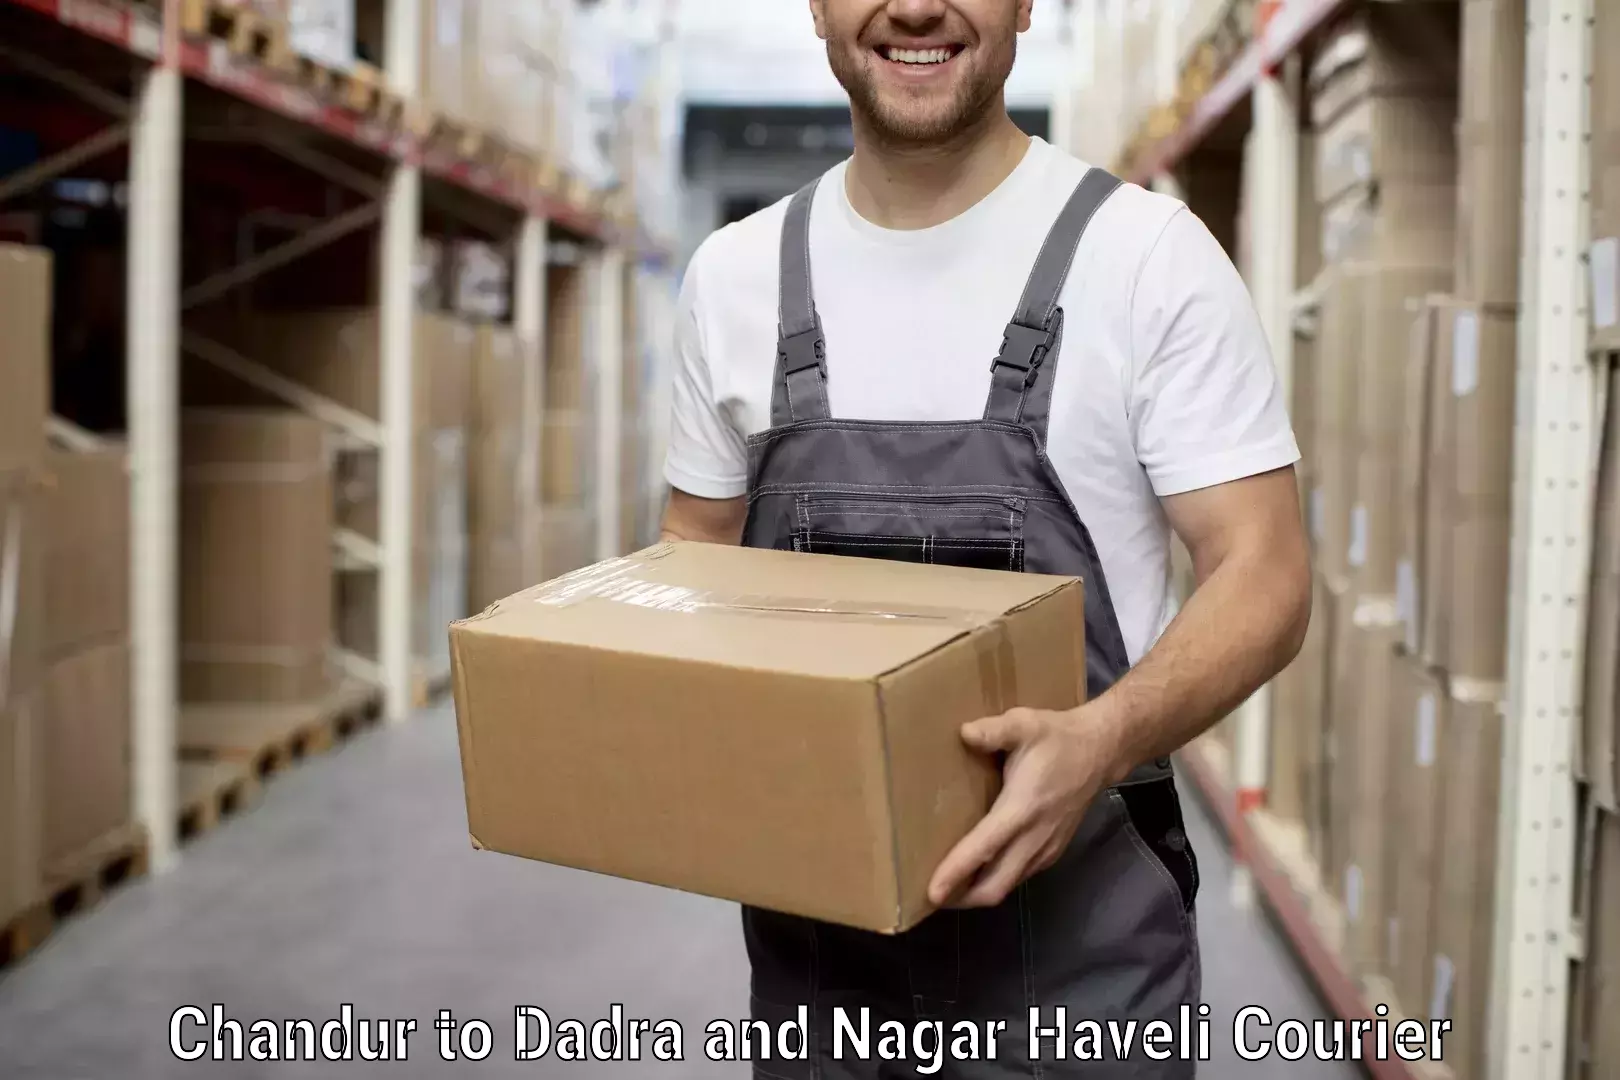 Professional moving assistance in Chandur to Dadra and Nagar Haveli